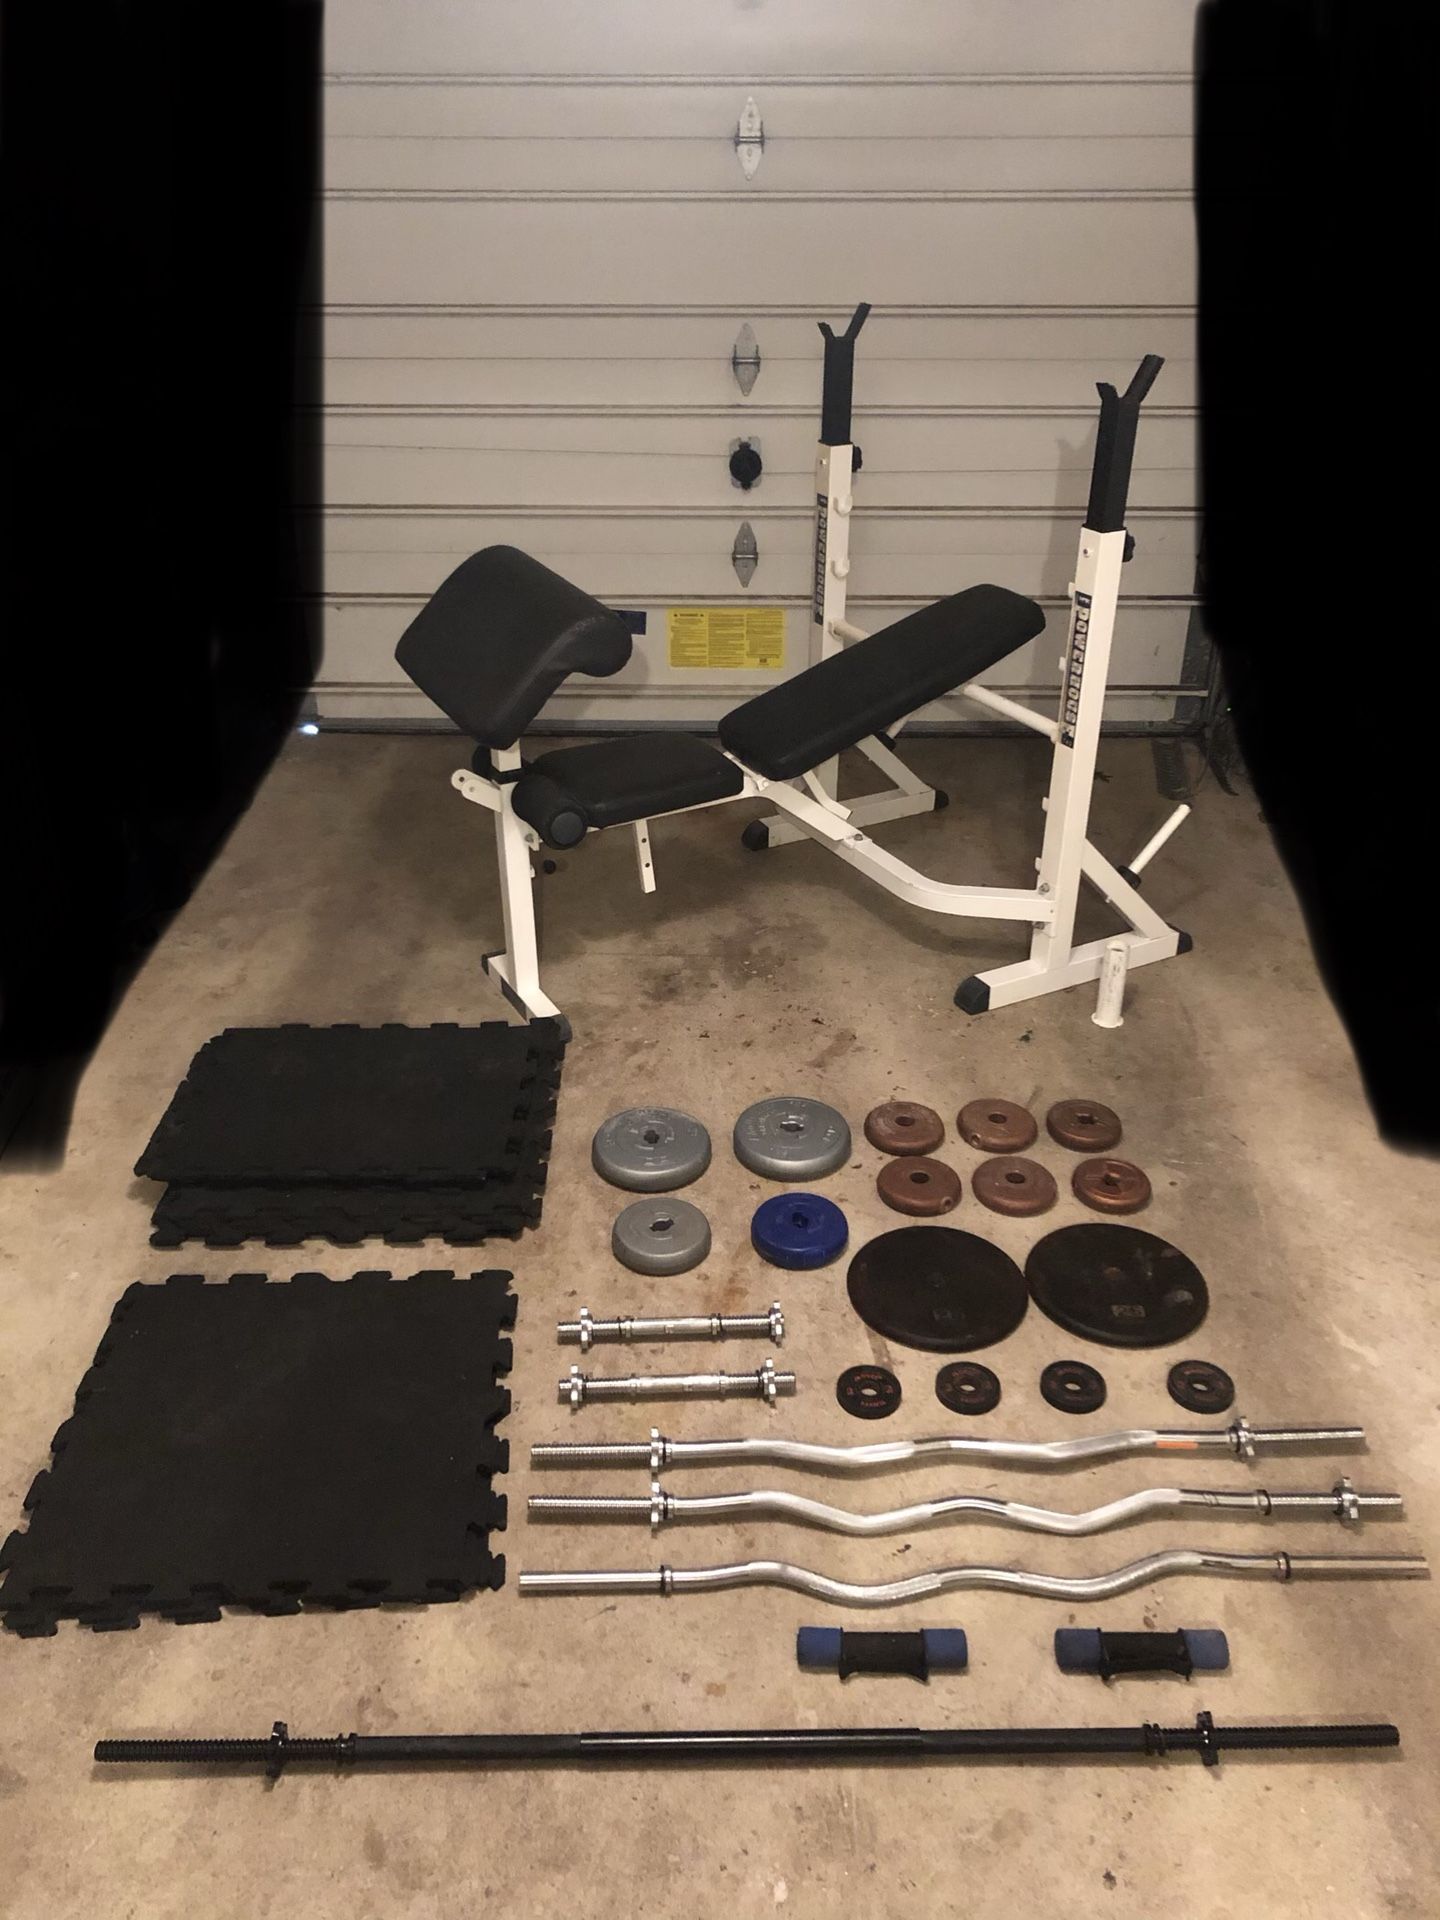 Adjustable weight bench with Squat capabilities, weights, EZ Curl and straight bar, adjustable dumbbells, flooring